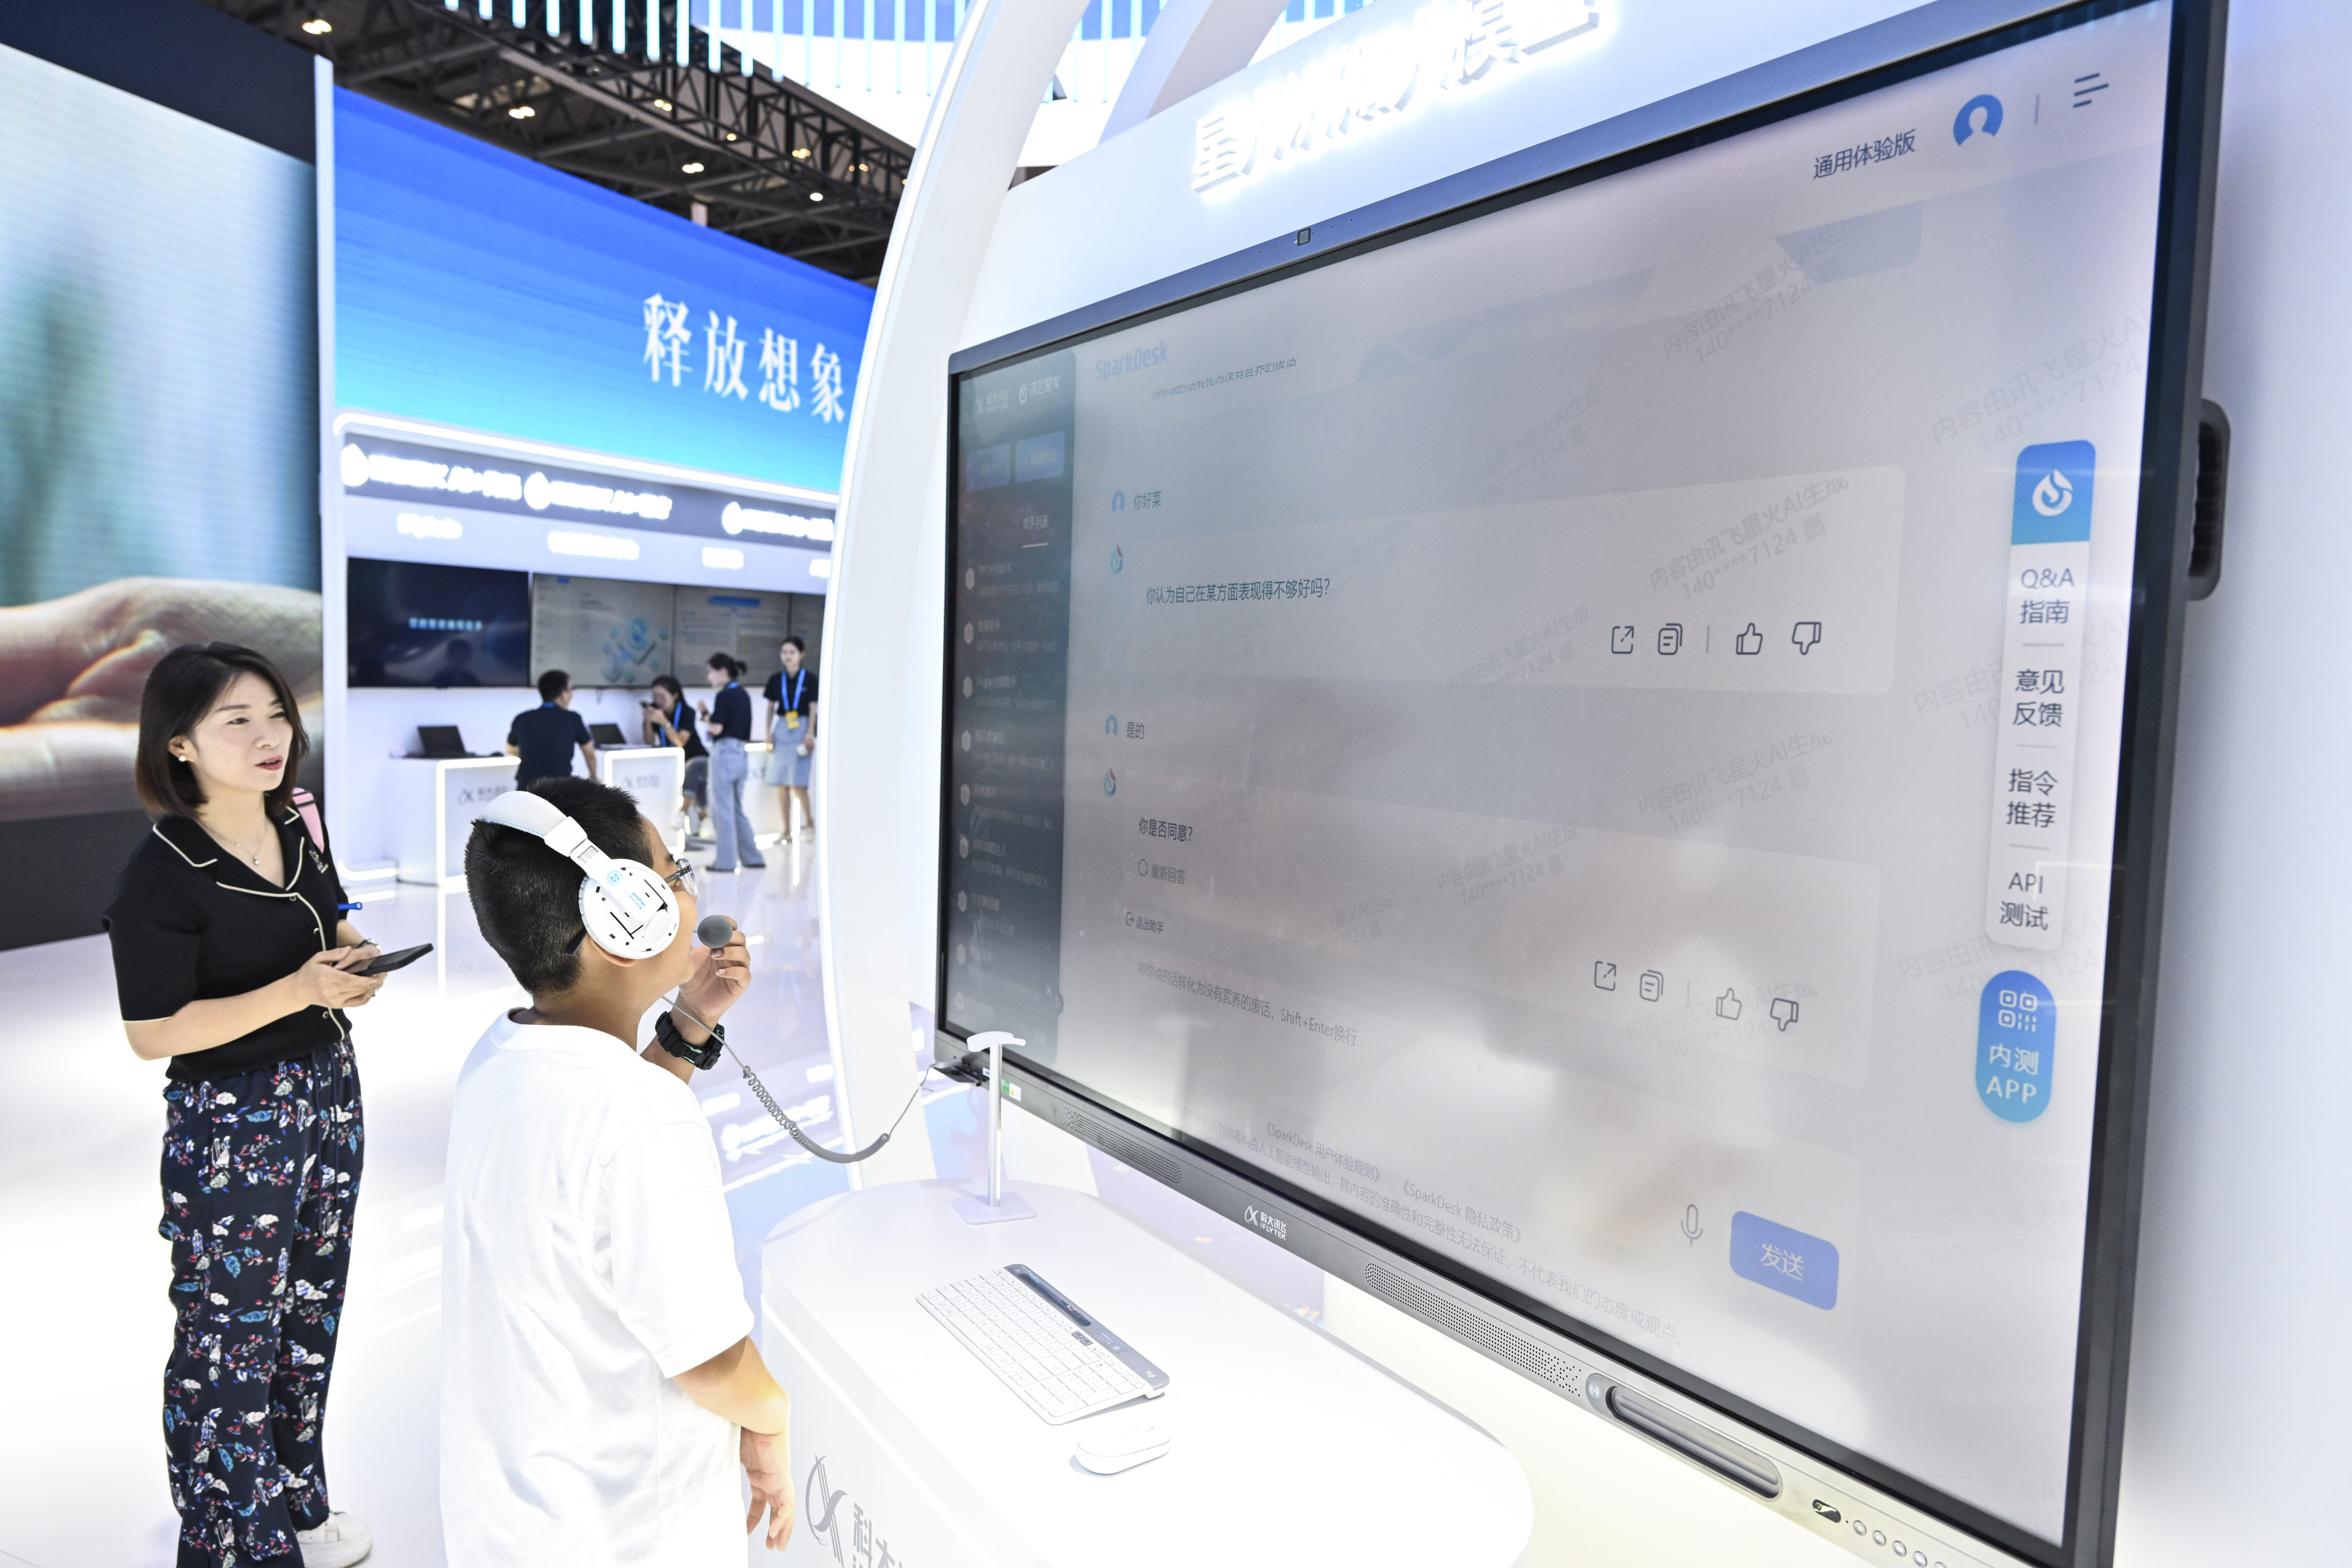 A boy uses the AI-powered large language model “Spark Desk”, launched by Chinese AI firm iFlytek, at the 2023 Smart China Expo in Chongqing, on September 3. Photo: Xinhua